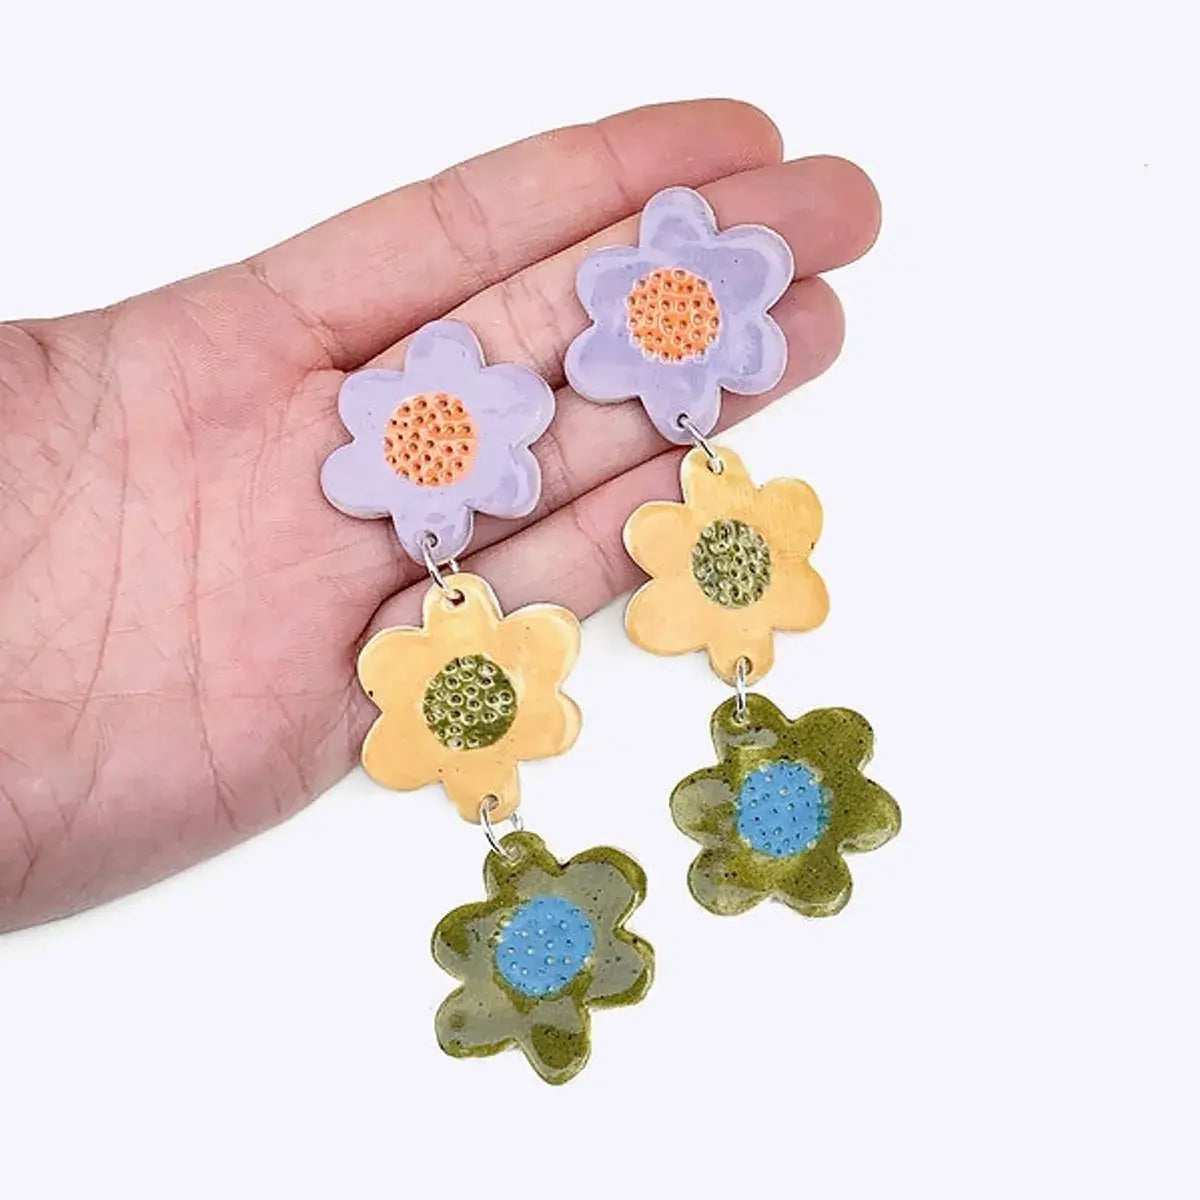 Handmade Clay Earrings by Togetherness